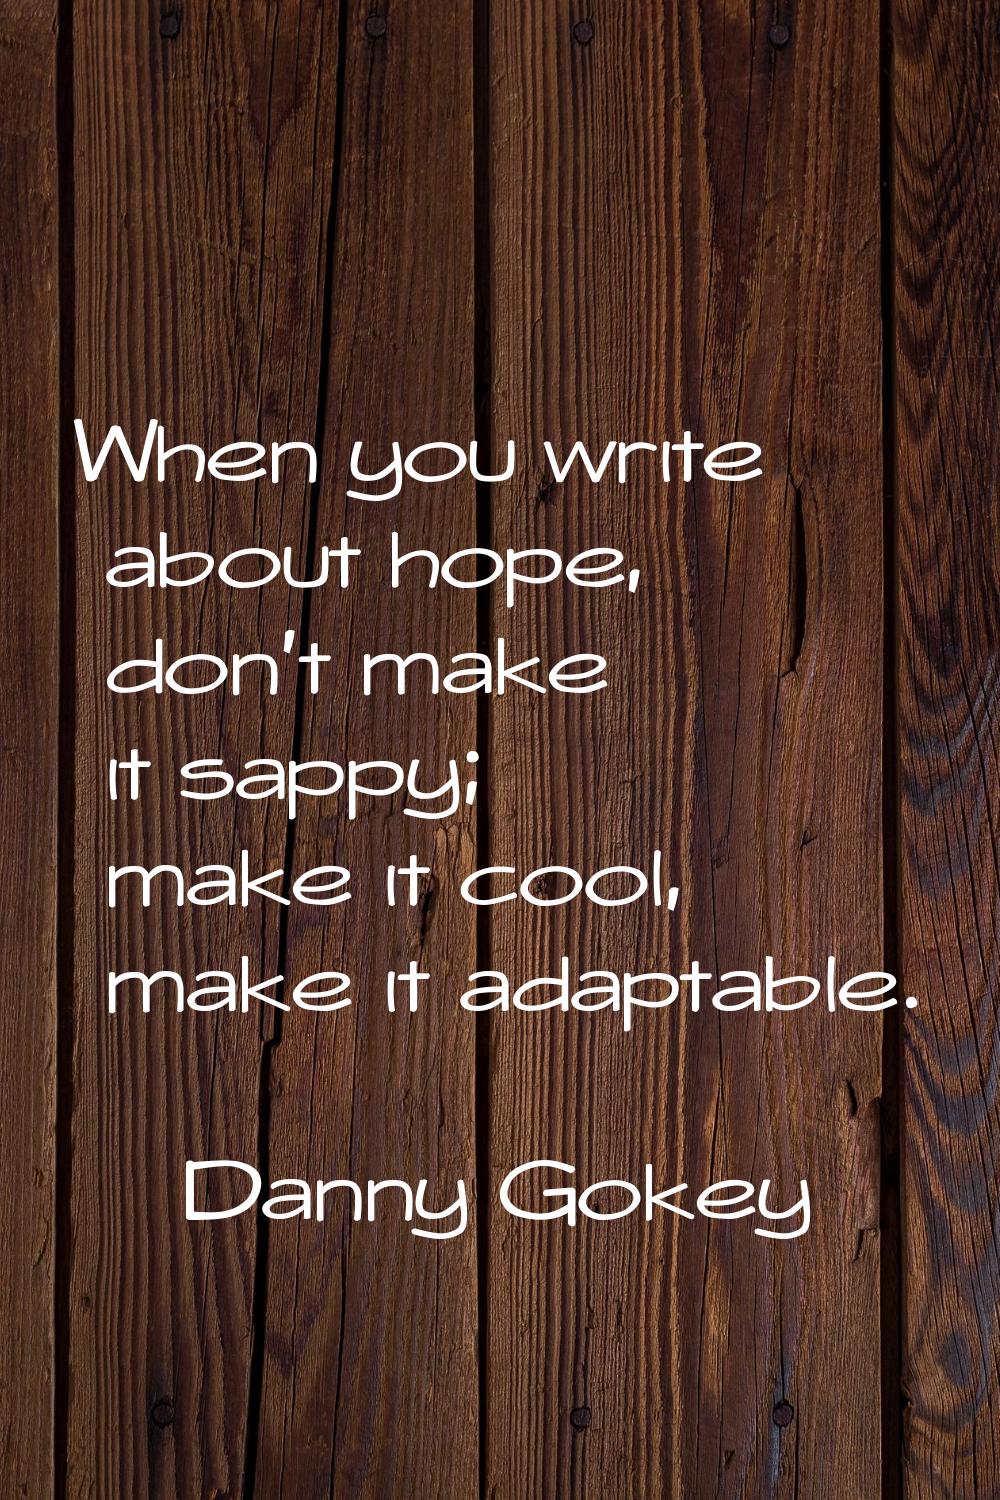 When you write about hope, don't make it sappy; make it cool, make it adaptable.